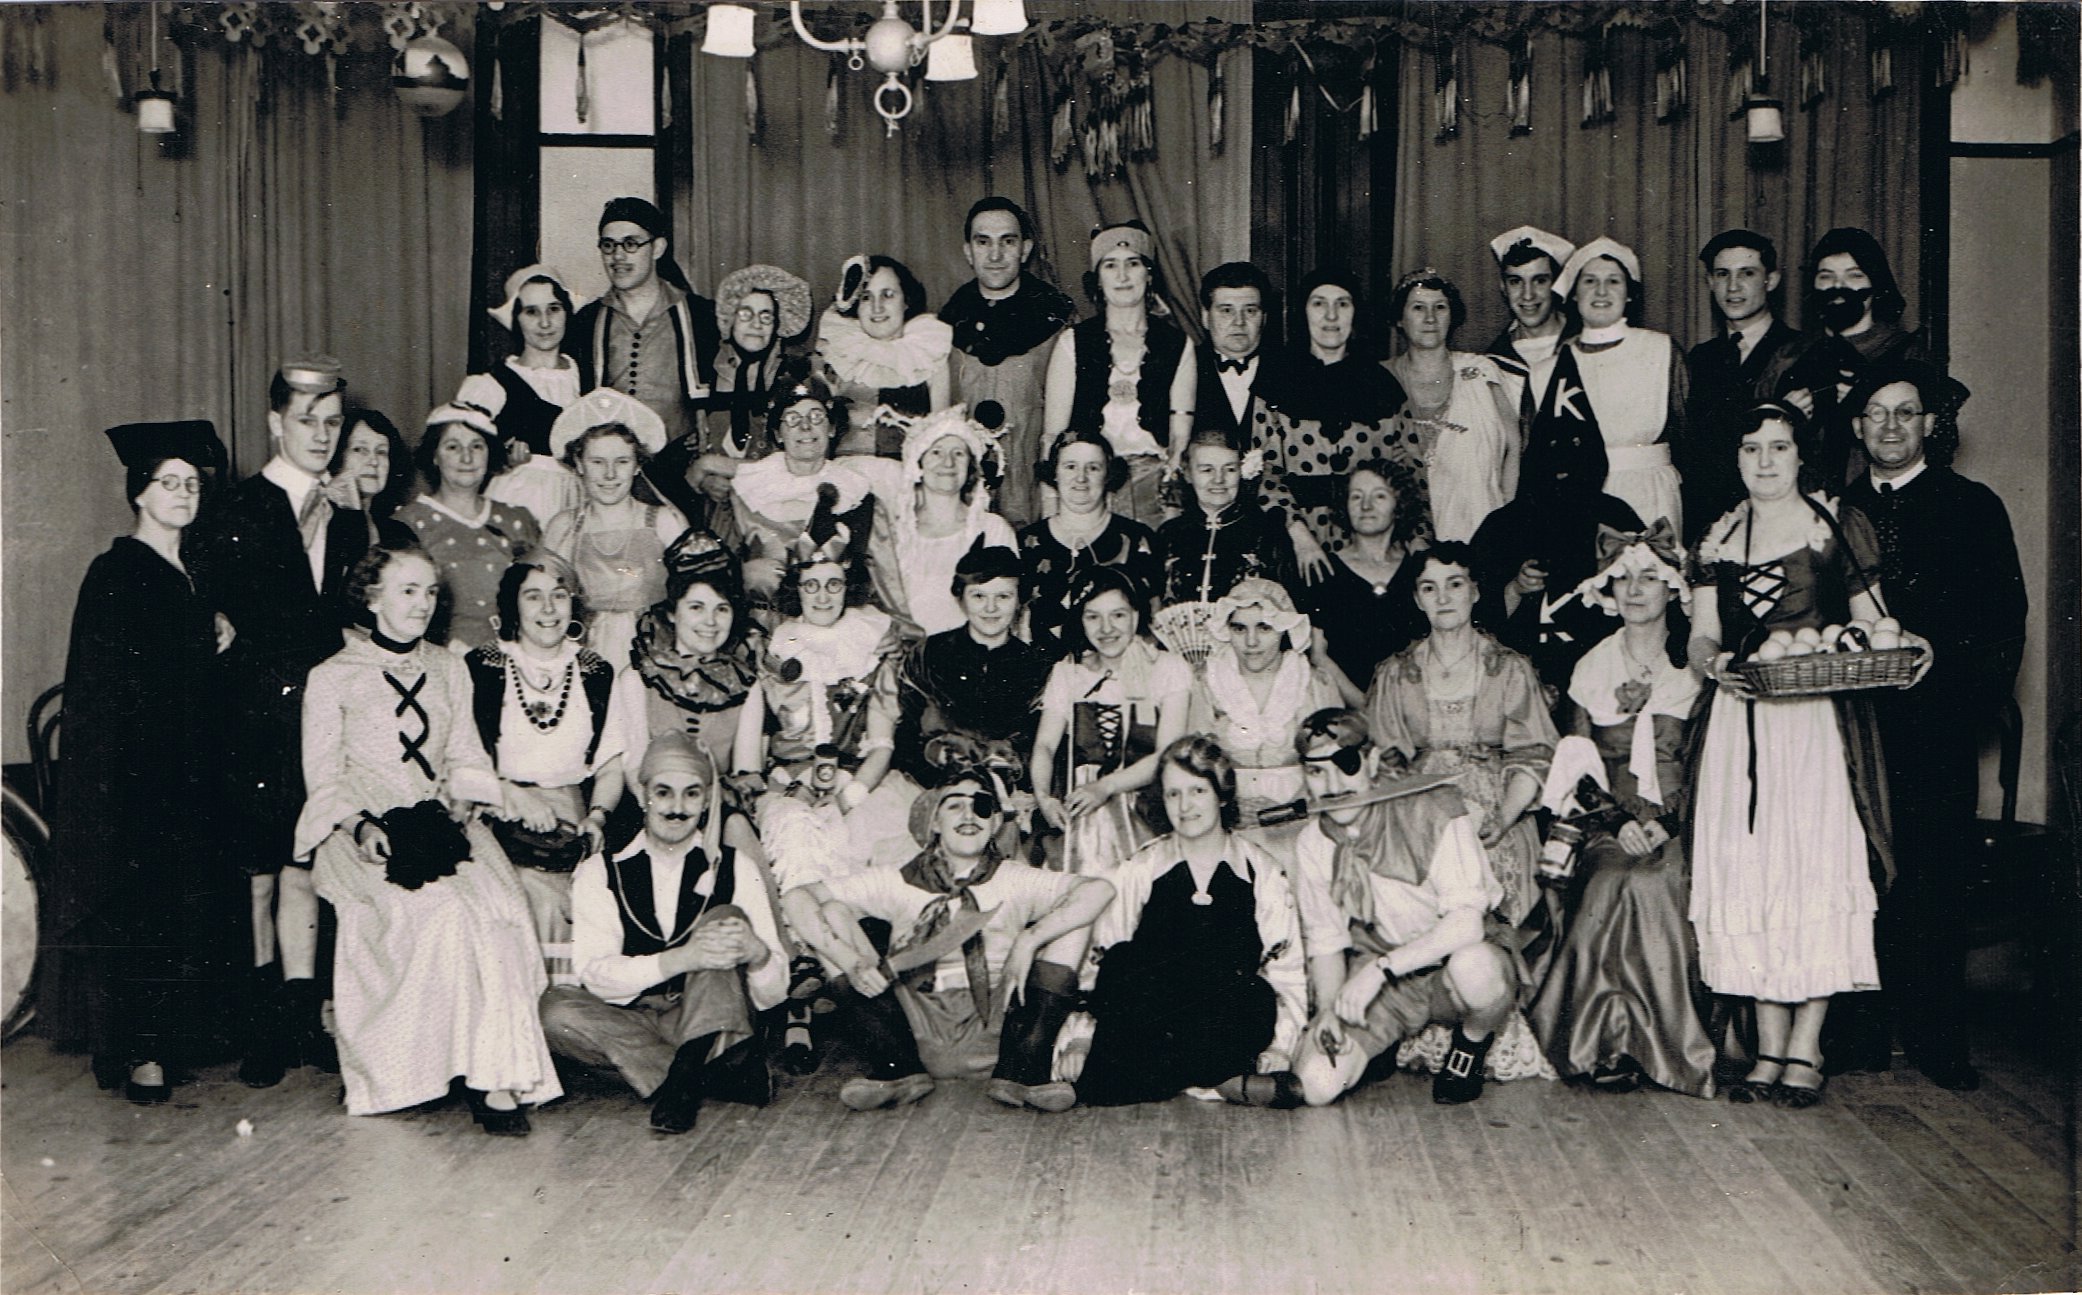 Some of the family at a fancy dress party